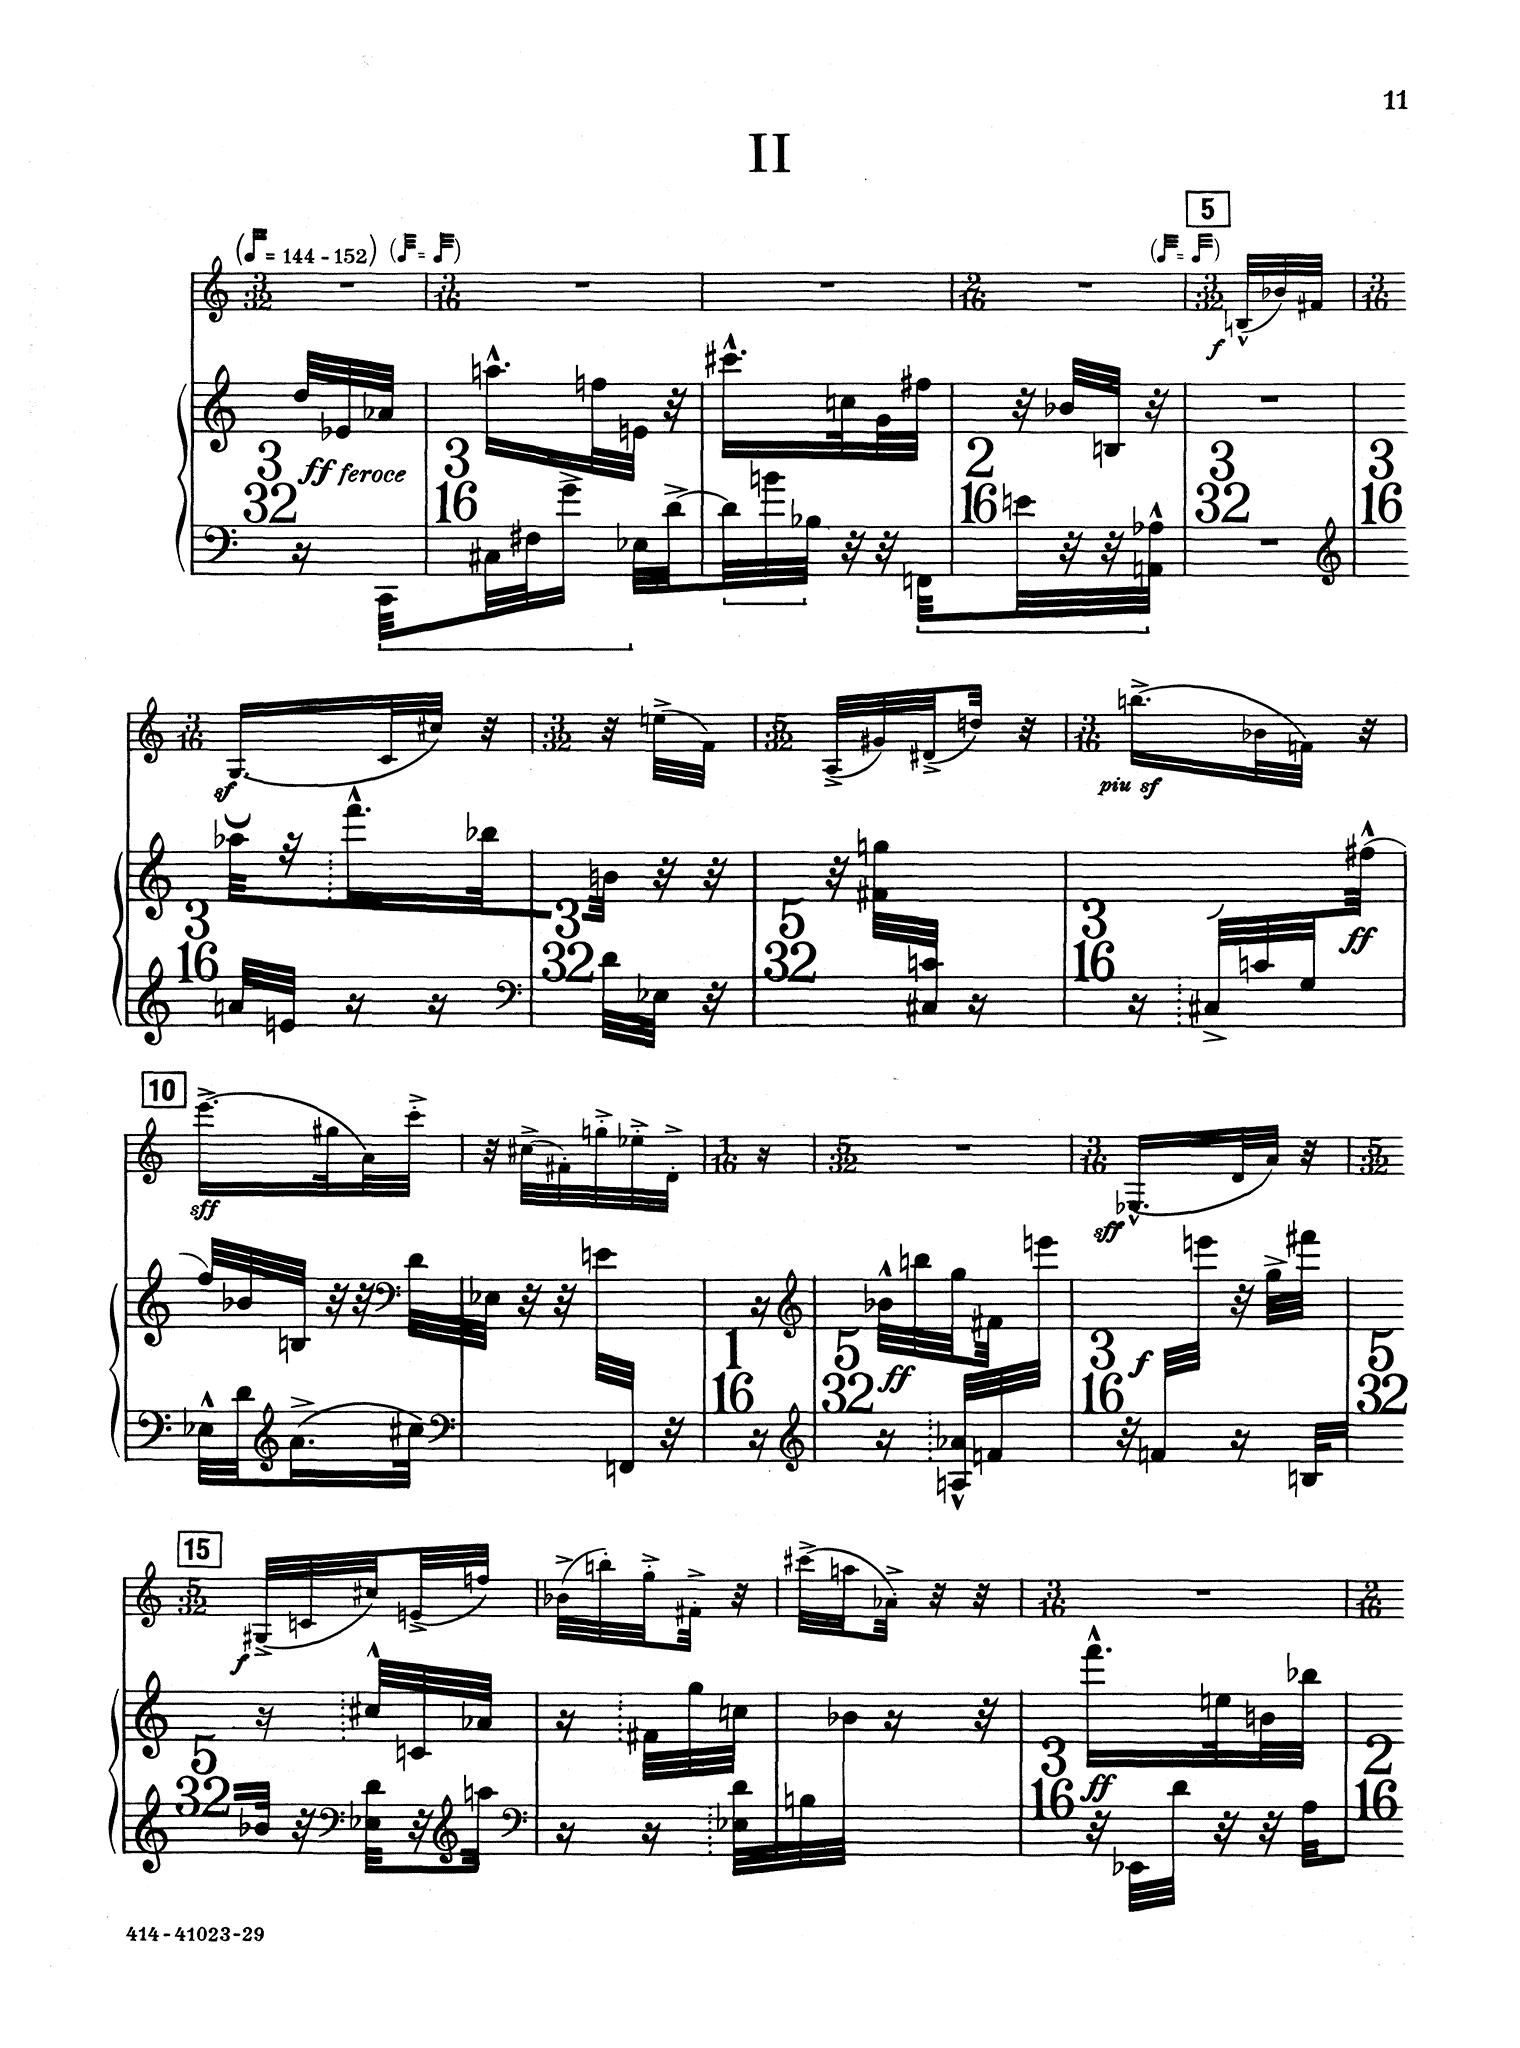 George Rochberg Dialogues clarinet and piano - Movement 2